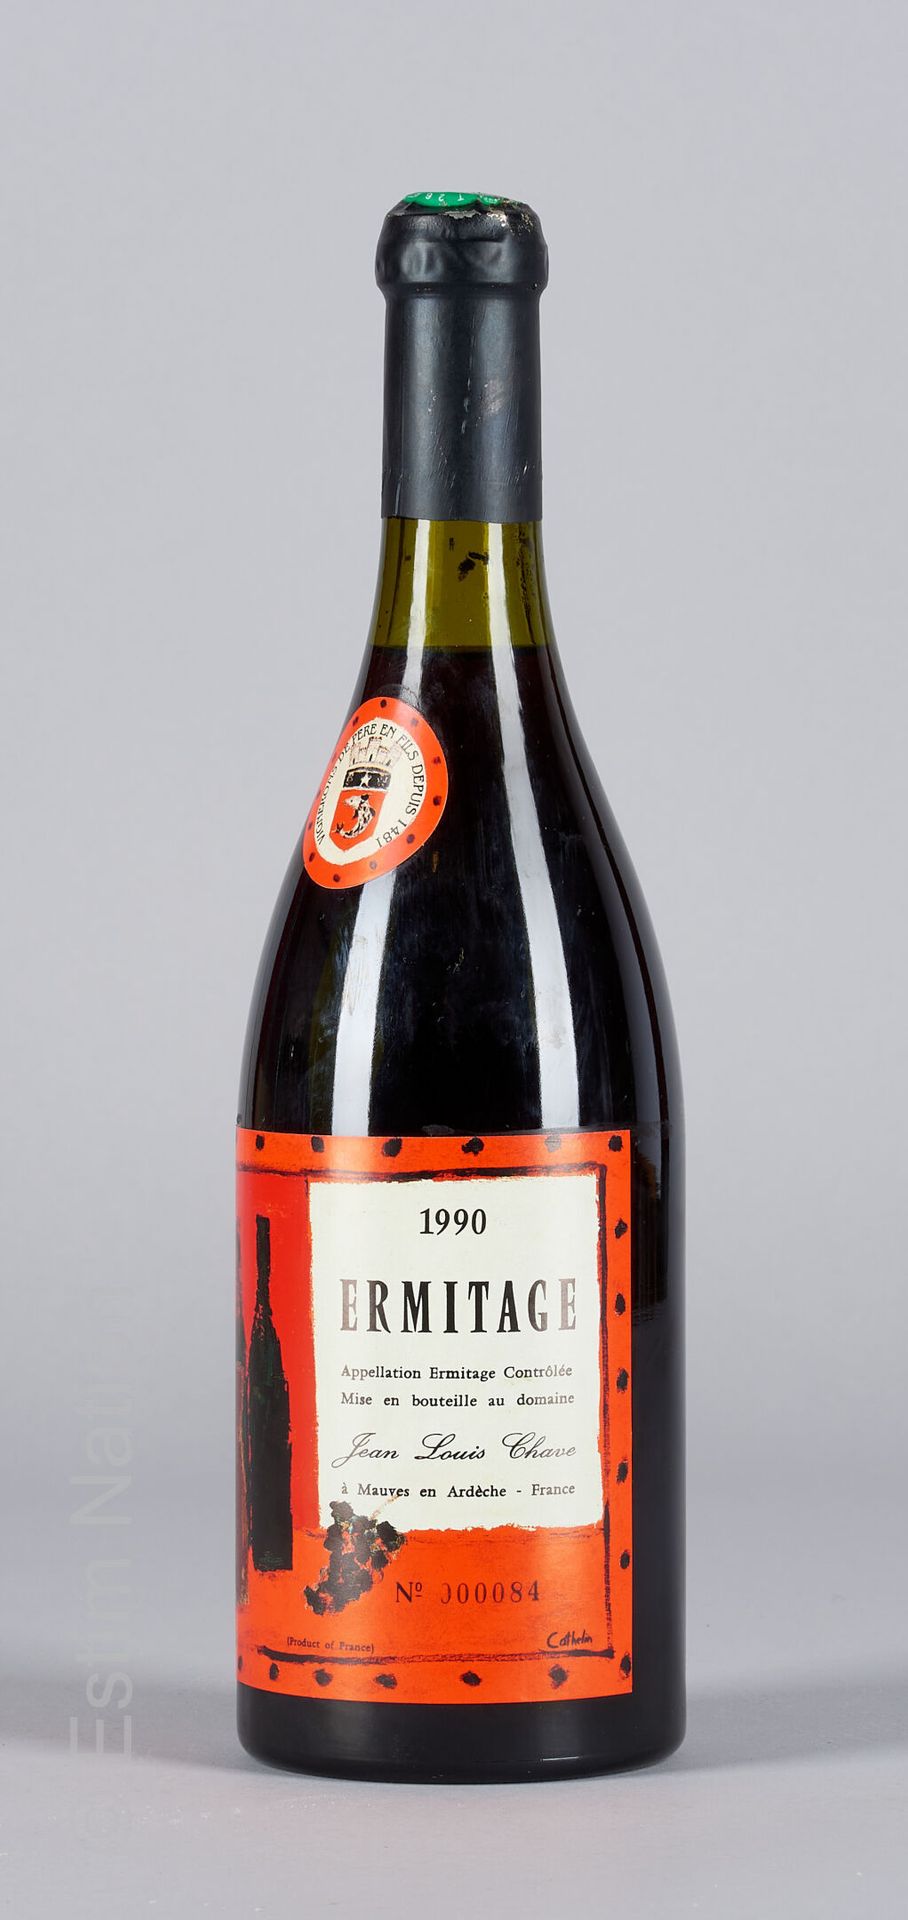 CUVEE CATHELIN 1 botella ERMITAGE 1990 Cuvée Cathelin Jean-Louis Chave

(N. Entr&hellip;